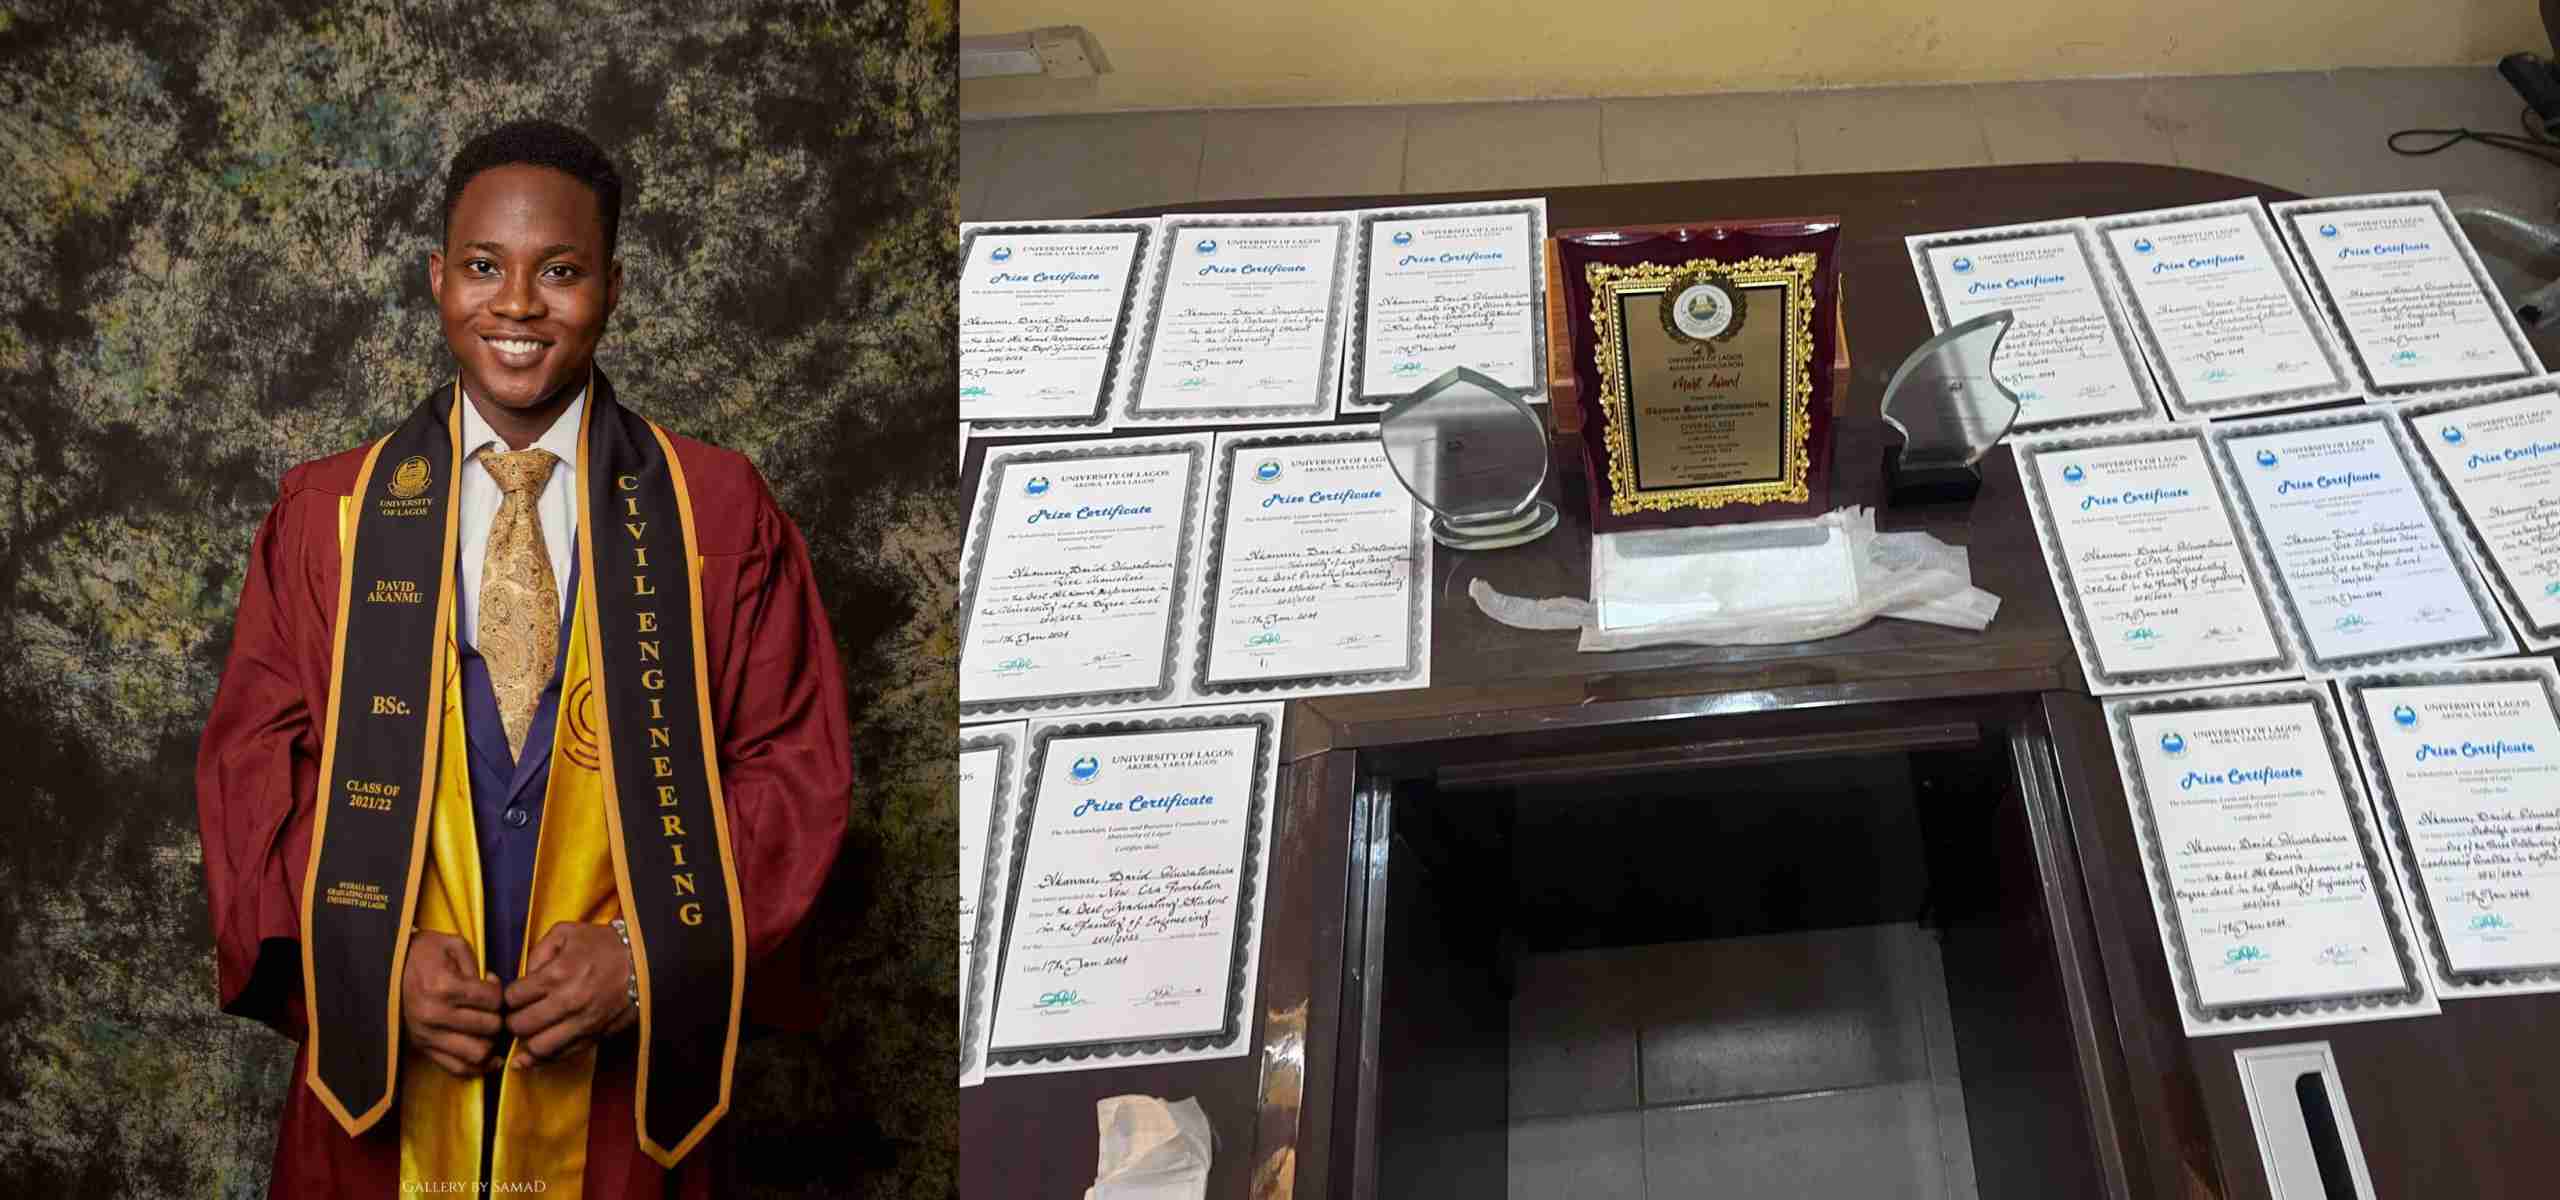 A Gentleman Emerges UNILAG’s Best Graduating Student with a CGPA of 5.0